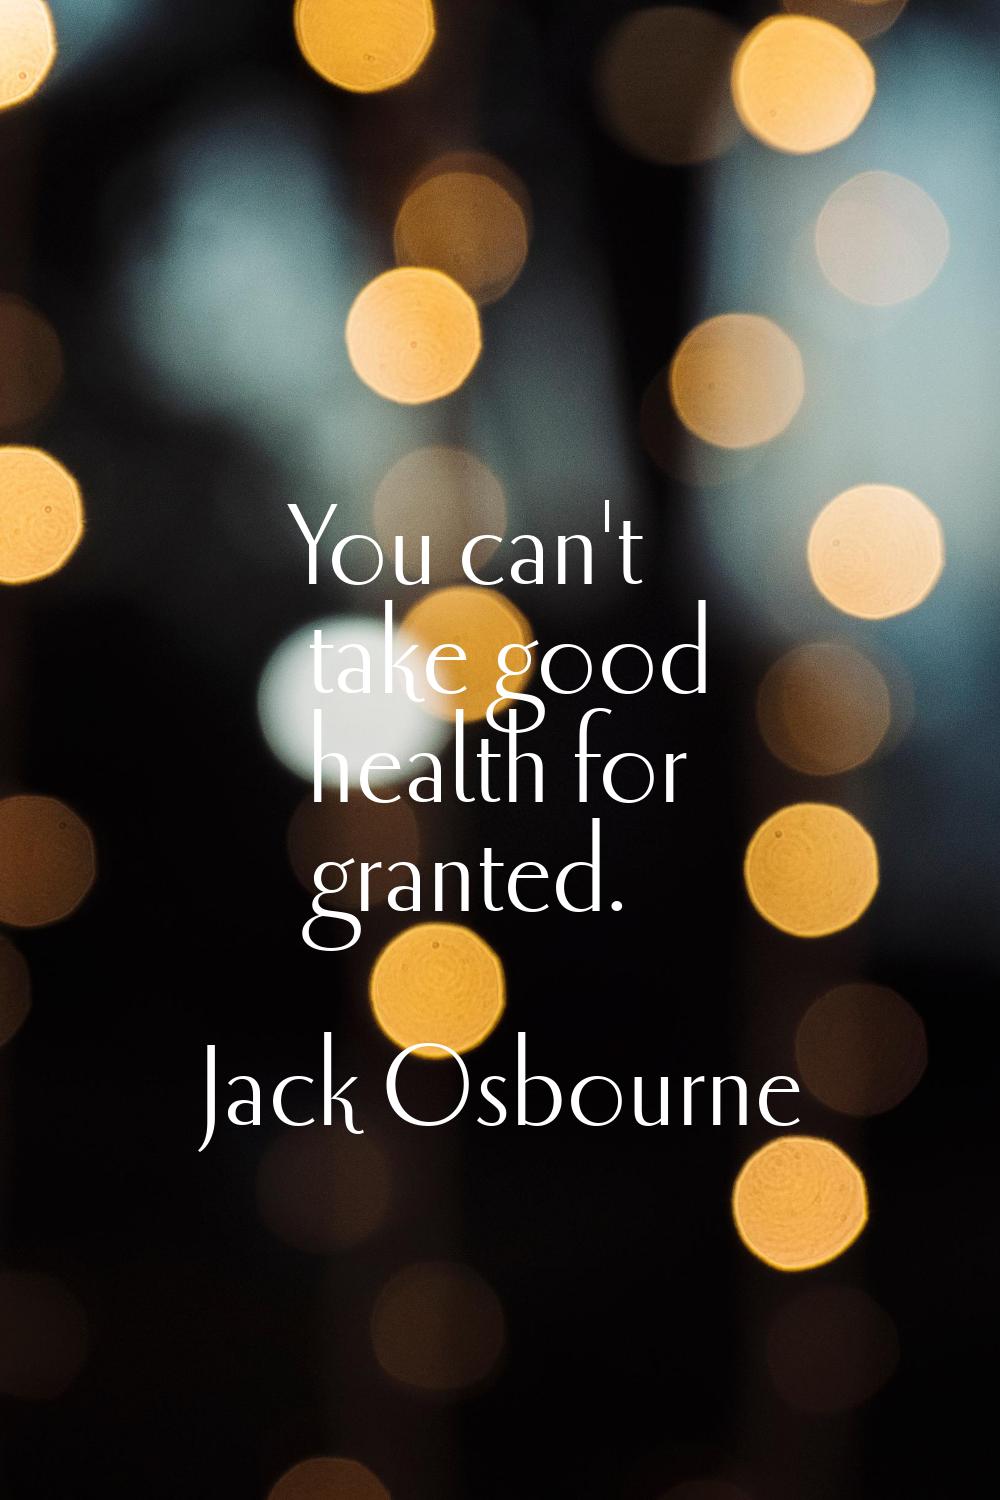 You can't take good health for granted.